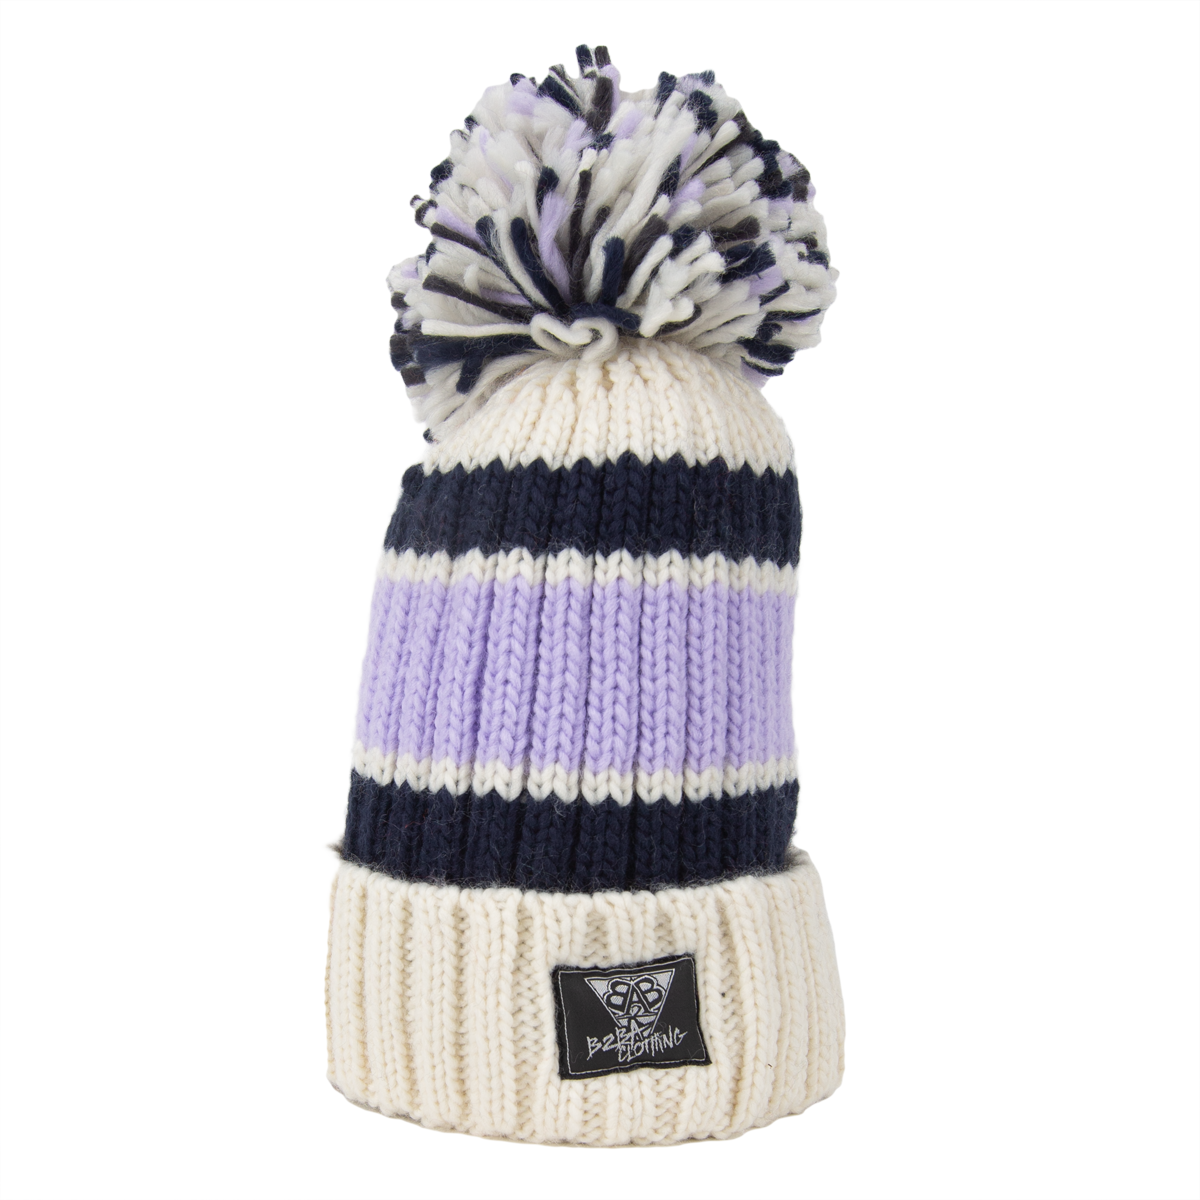 Knitted Bobble Beanie "Blueberry Cheescake"